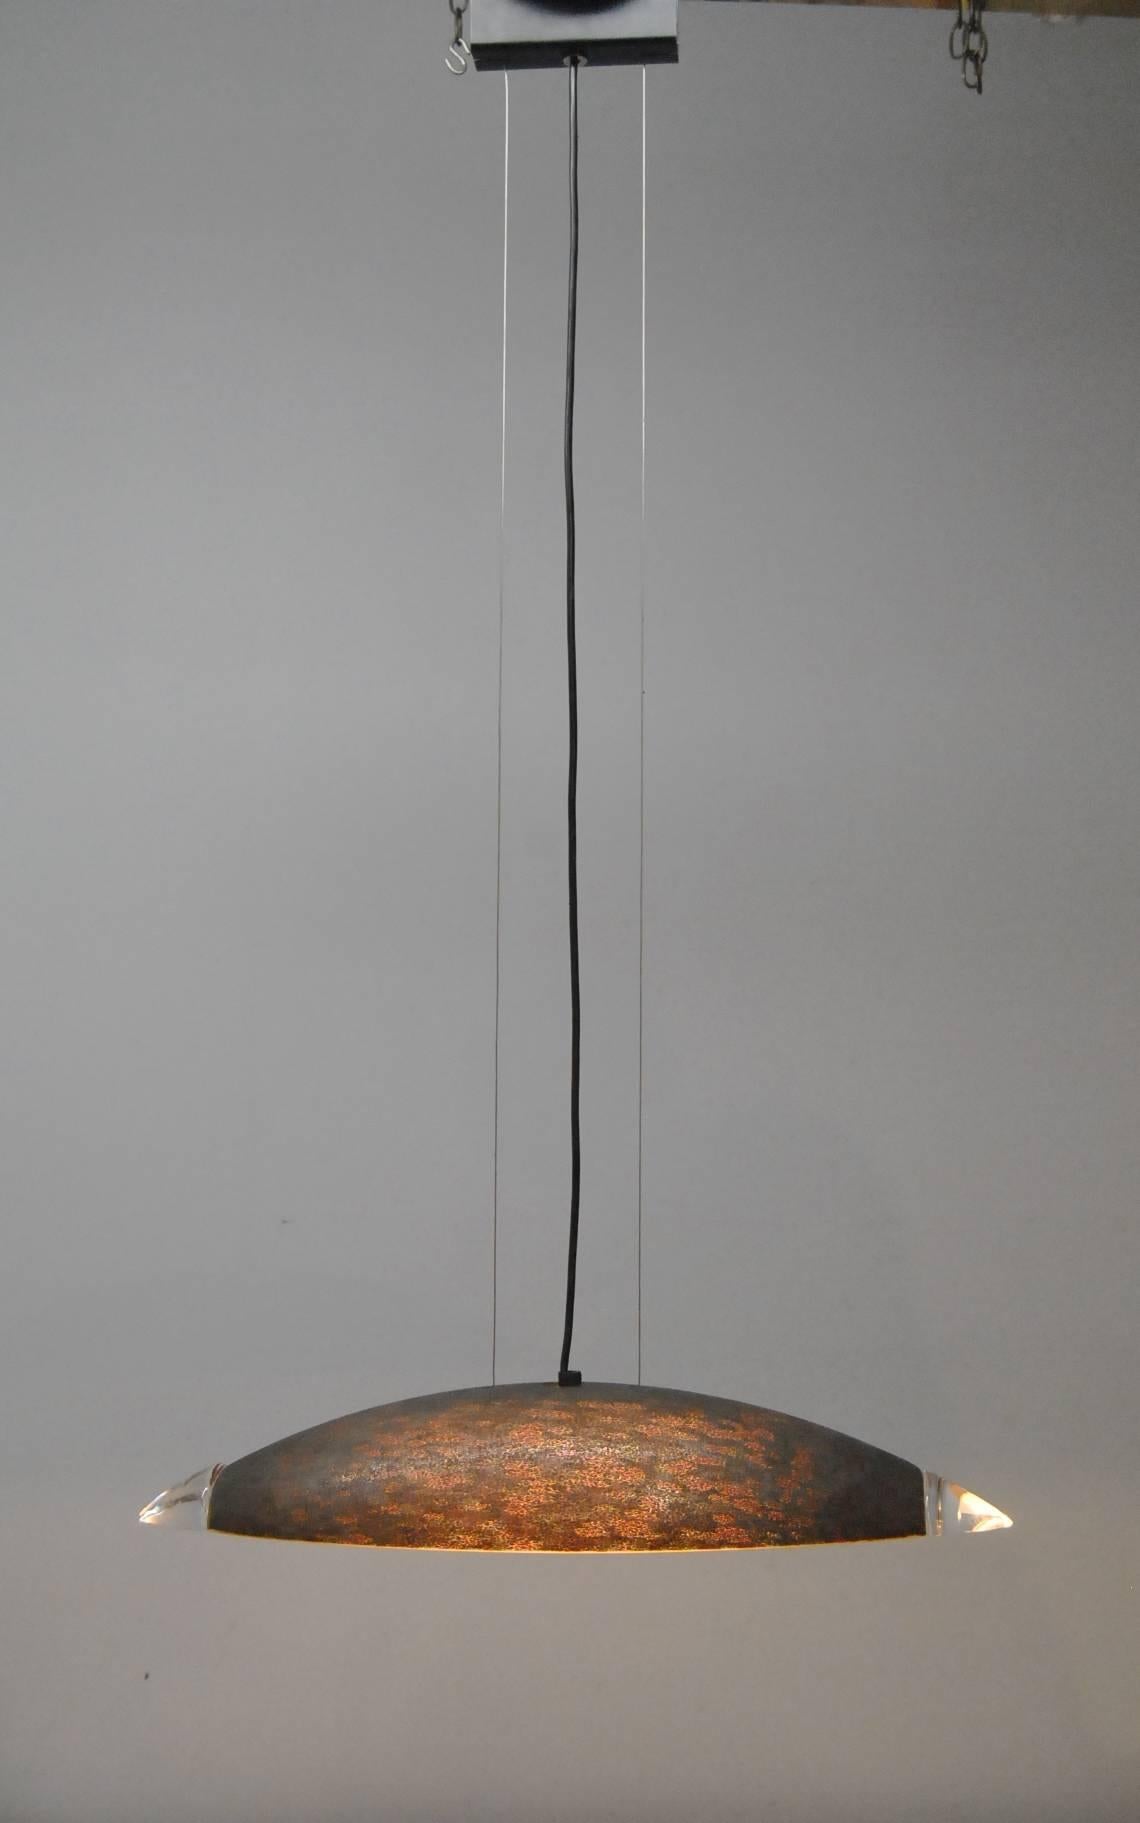 An unusual contemporary glass pendant light designed by Barovier e Toso for Murano. The shade is a mottled glass in a bronze tone with clear glass tips. It is suspended from the ceiling by two wires. The fixture is lit by three sockets. Just a great